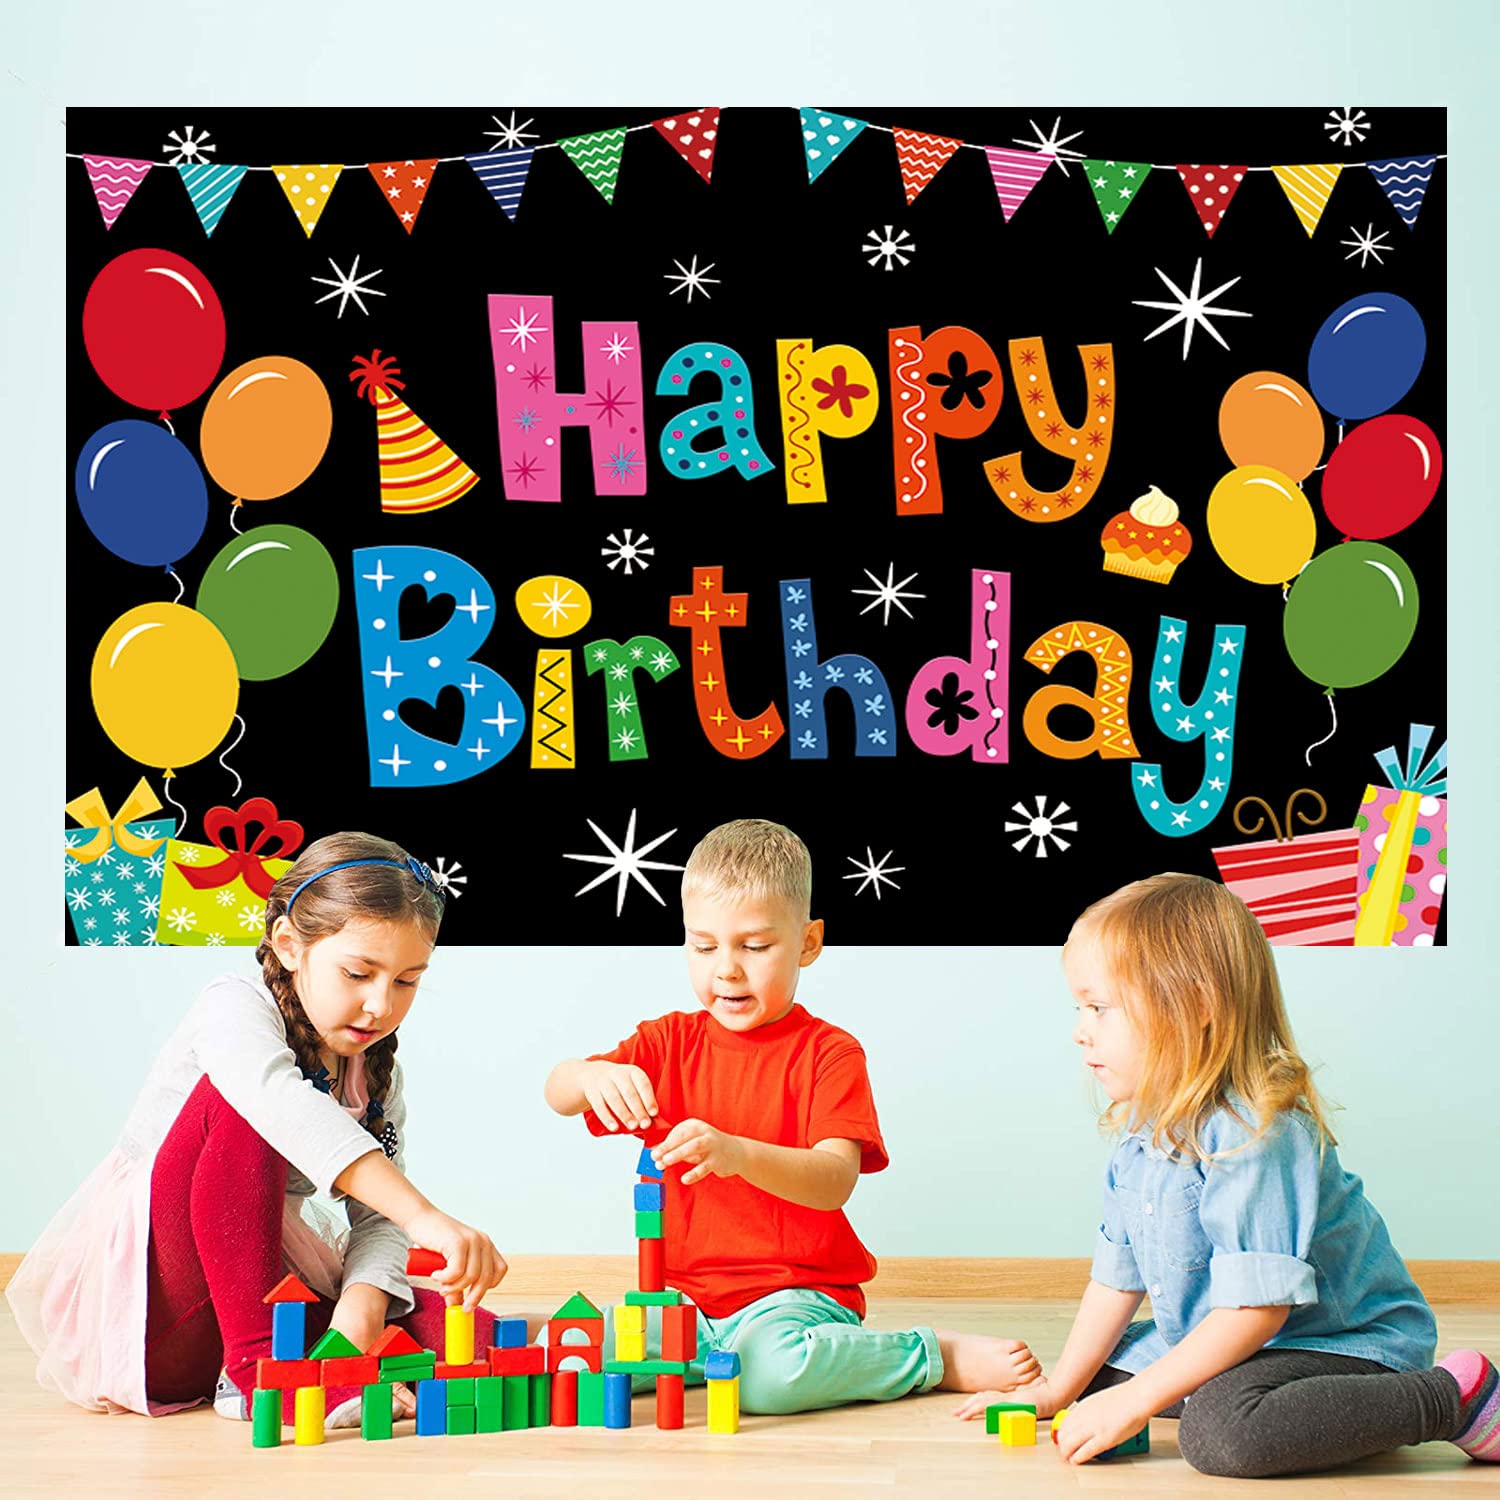 DIZHI Happy Birthday Banner Backdrop Colorful Happy Birthday Party Decorations Large Happy Birthday Yard Sign Backdrop for Baby Shower Birthday Party Indoor Outdoor Decoration Supplies 5x3ft